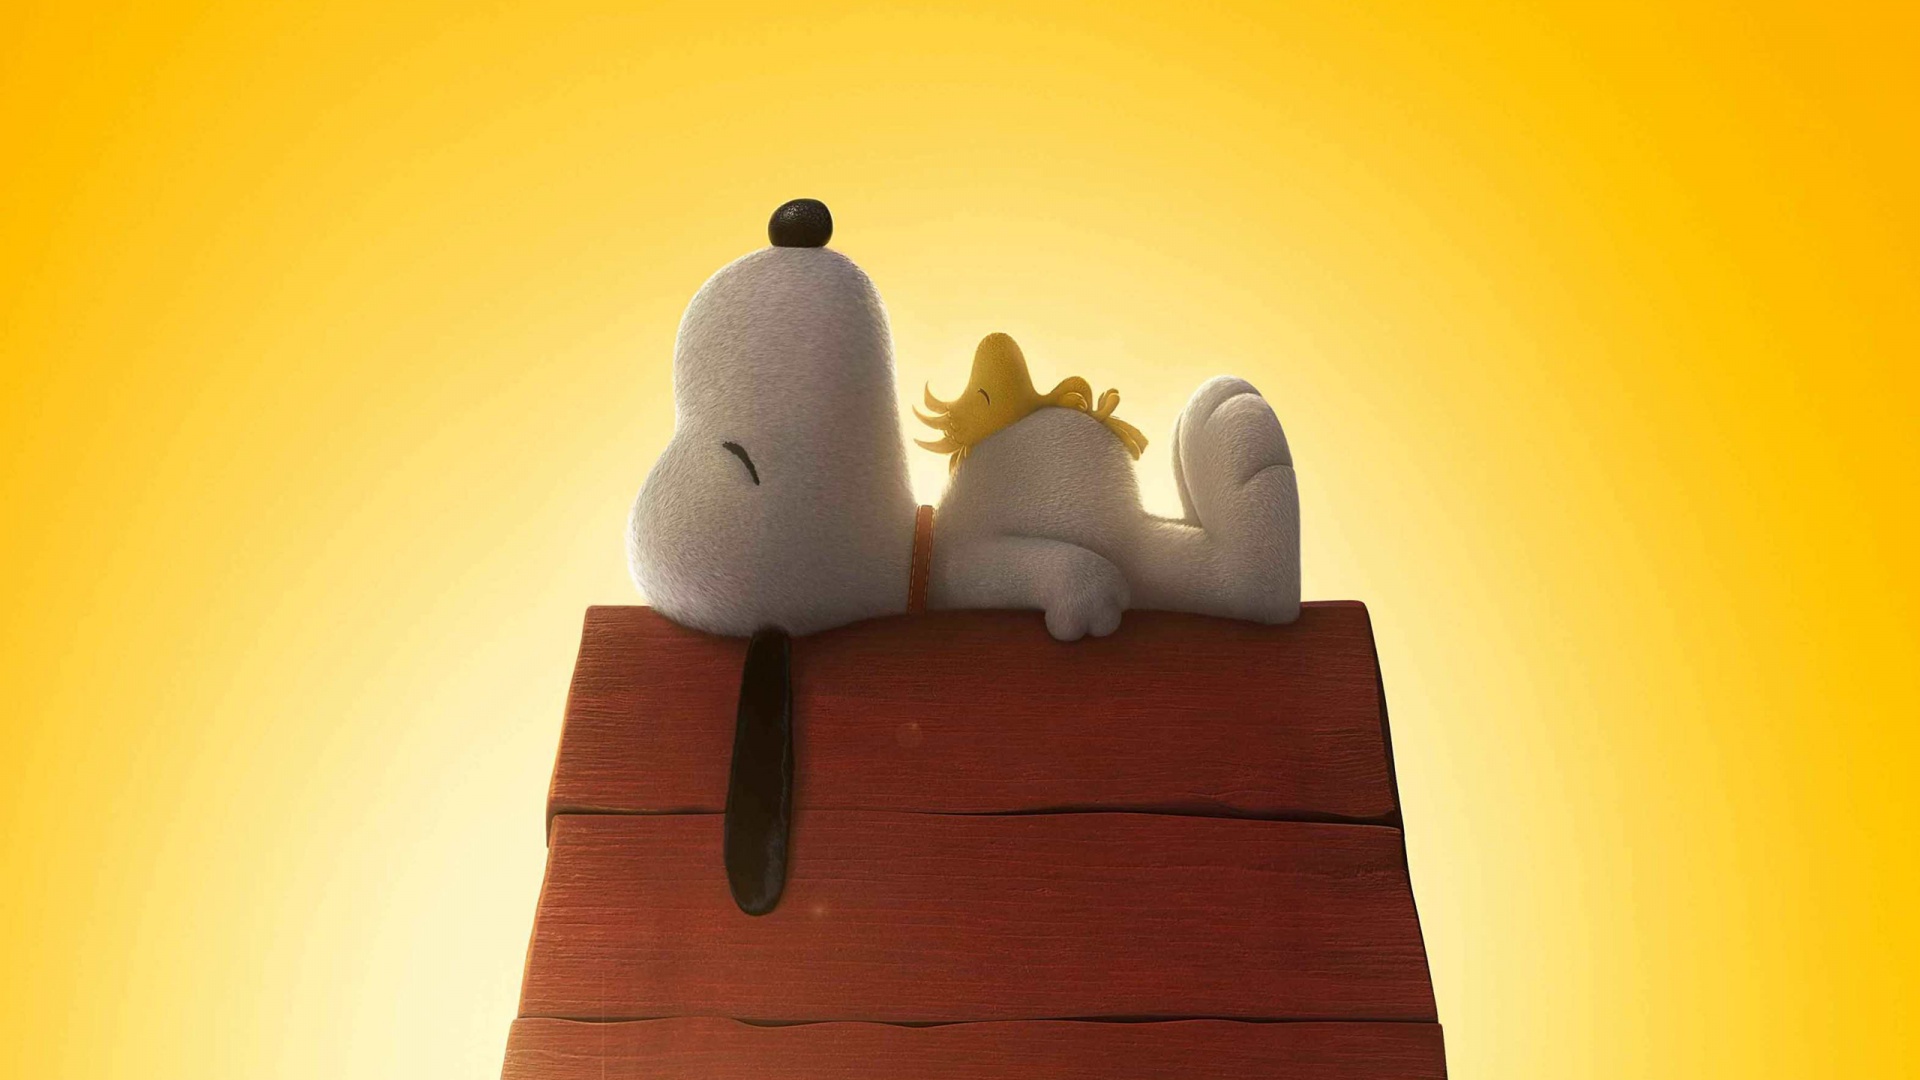 Peanuts 2015 Movie Wallpapers HD Wallpapers